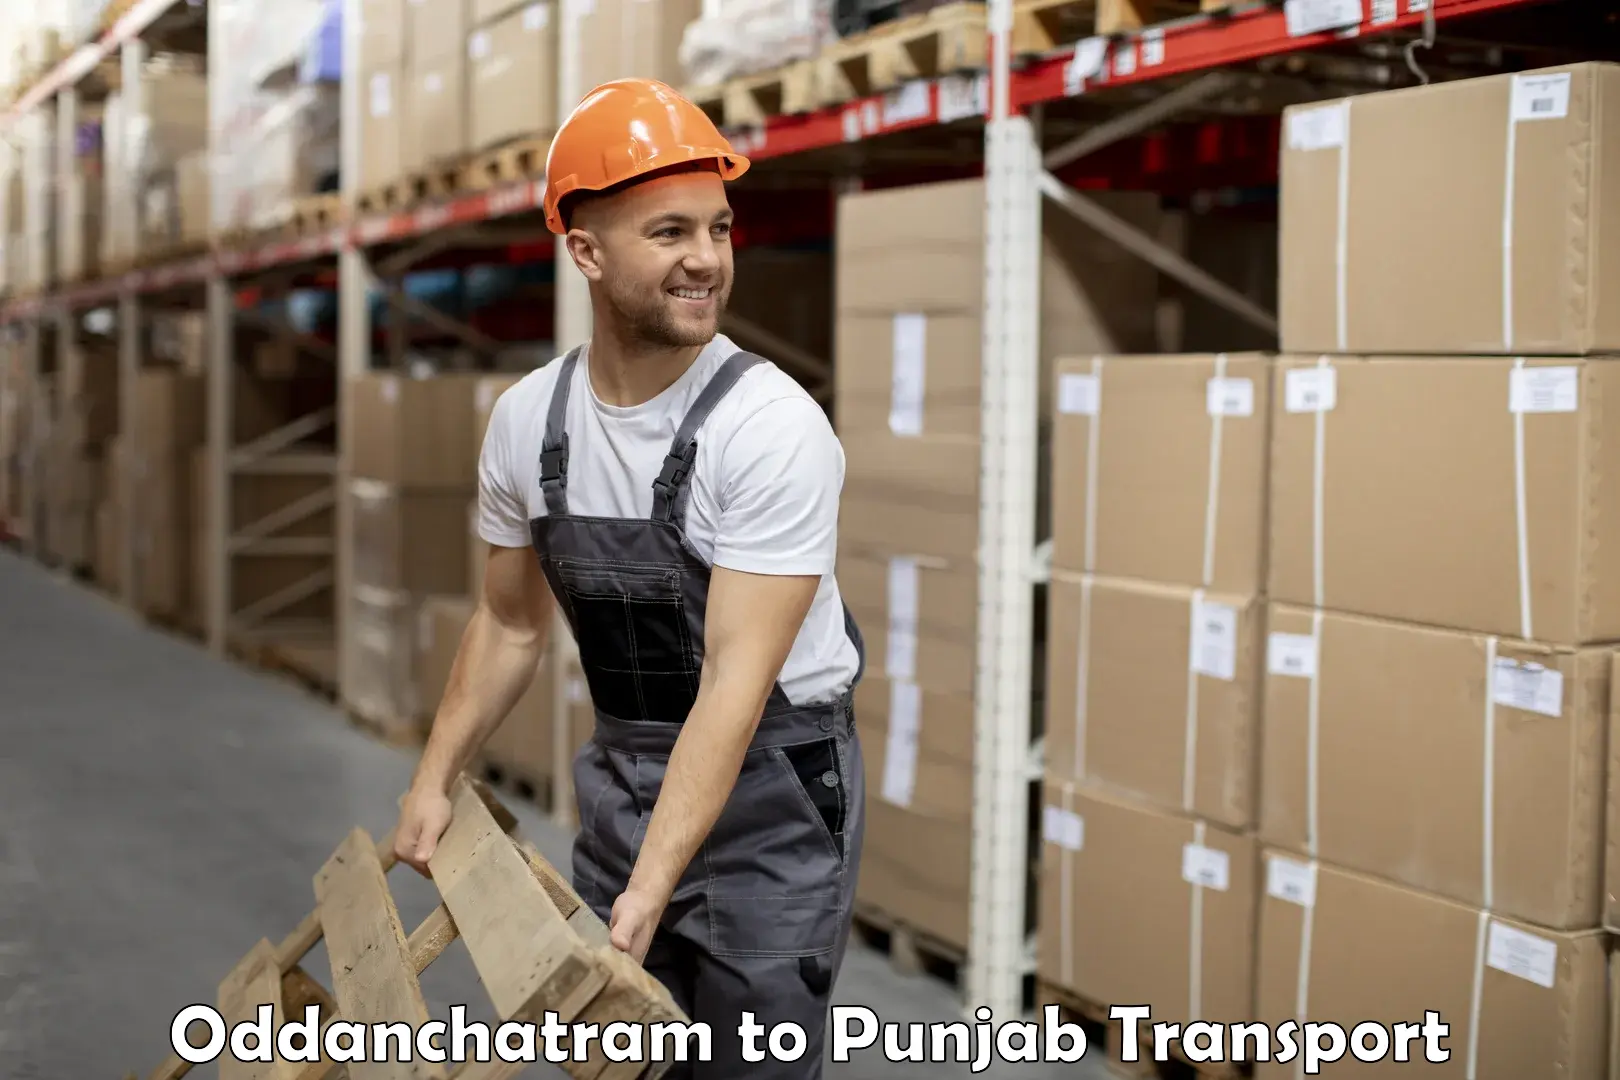 Daily parcel service transport in Oddanchatram to Phillaur